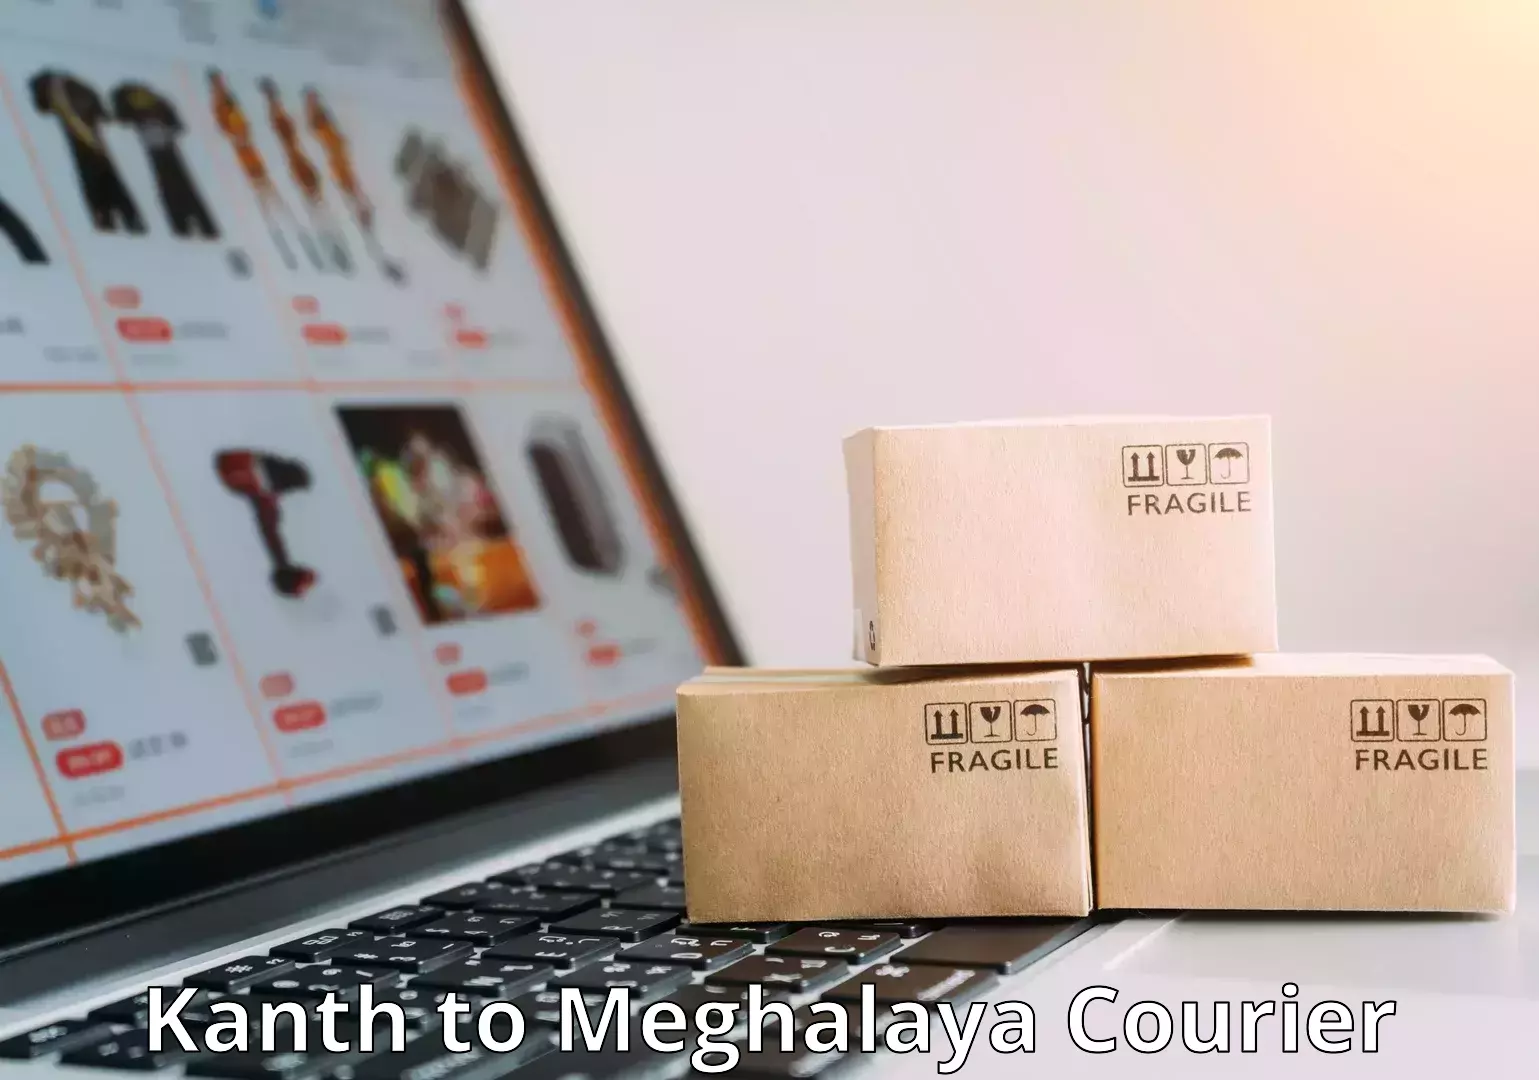 Personal effects shipping in Kanth to Meghalaya